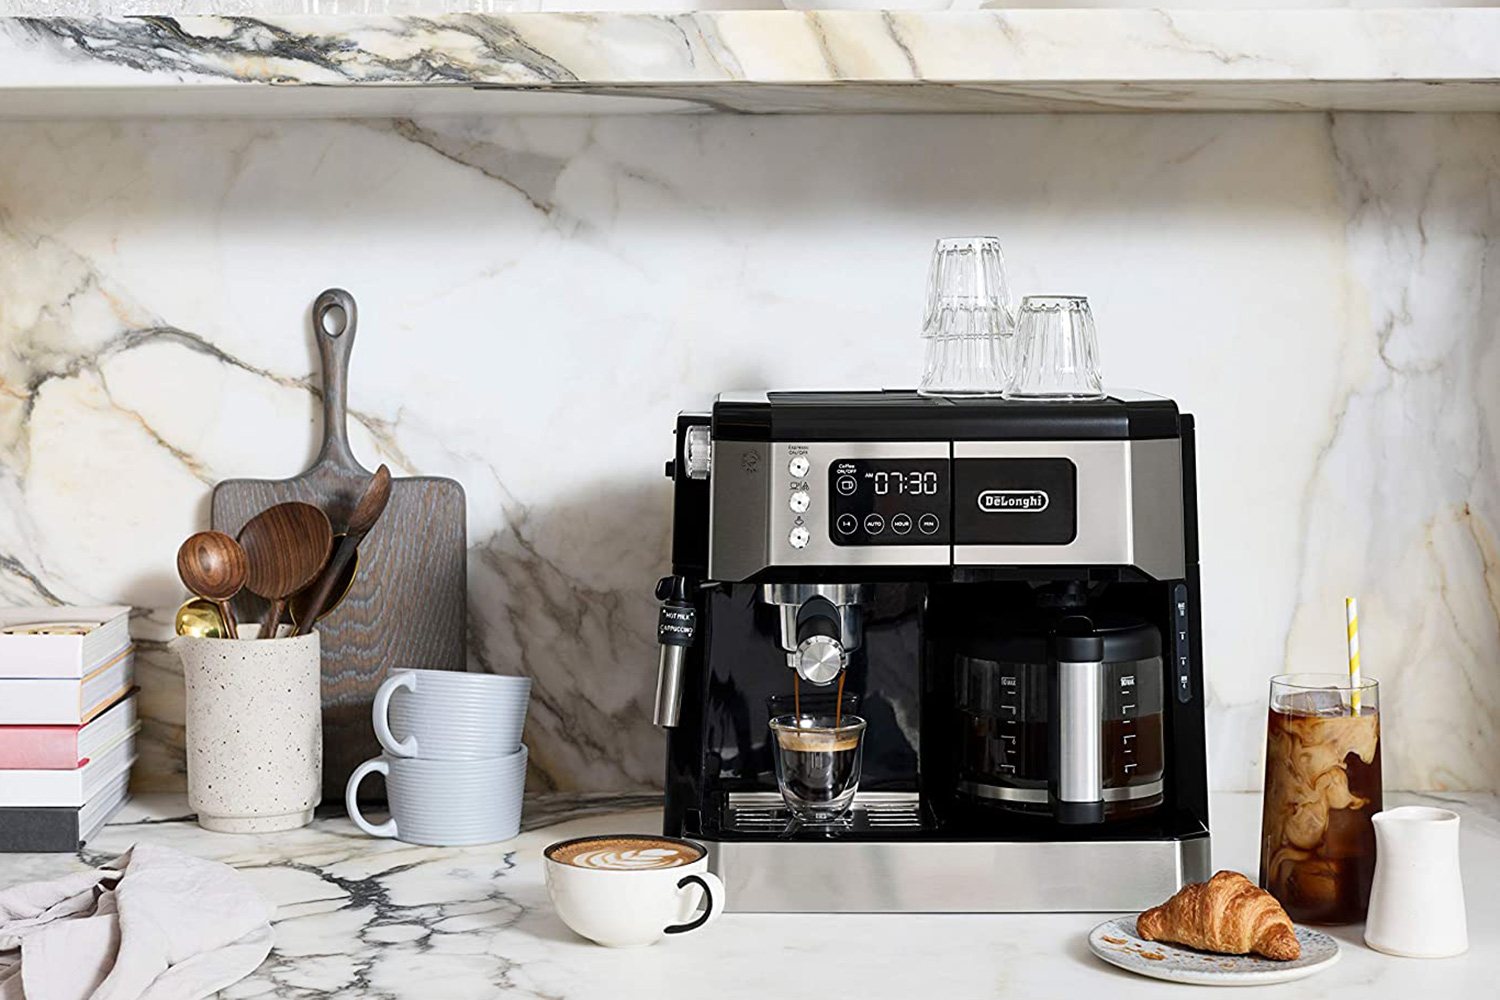 https://www.themanual.com/wp-content/uploads/sites/9/2021/10/best-combination-coffee-makers.jpg?fit=1500%2C1000&p=1